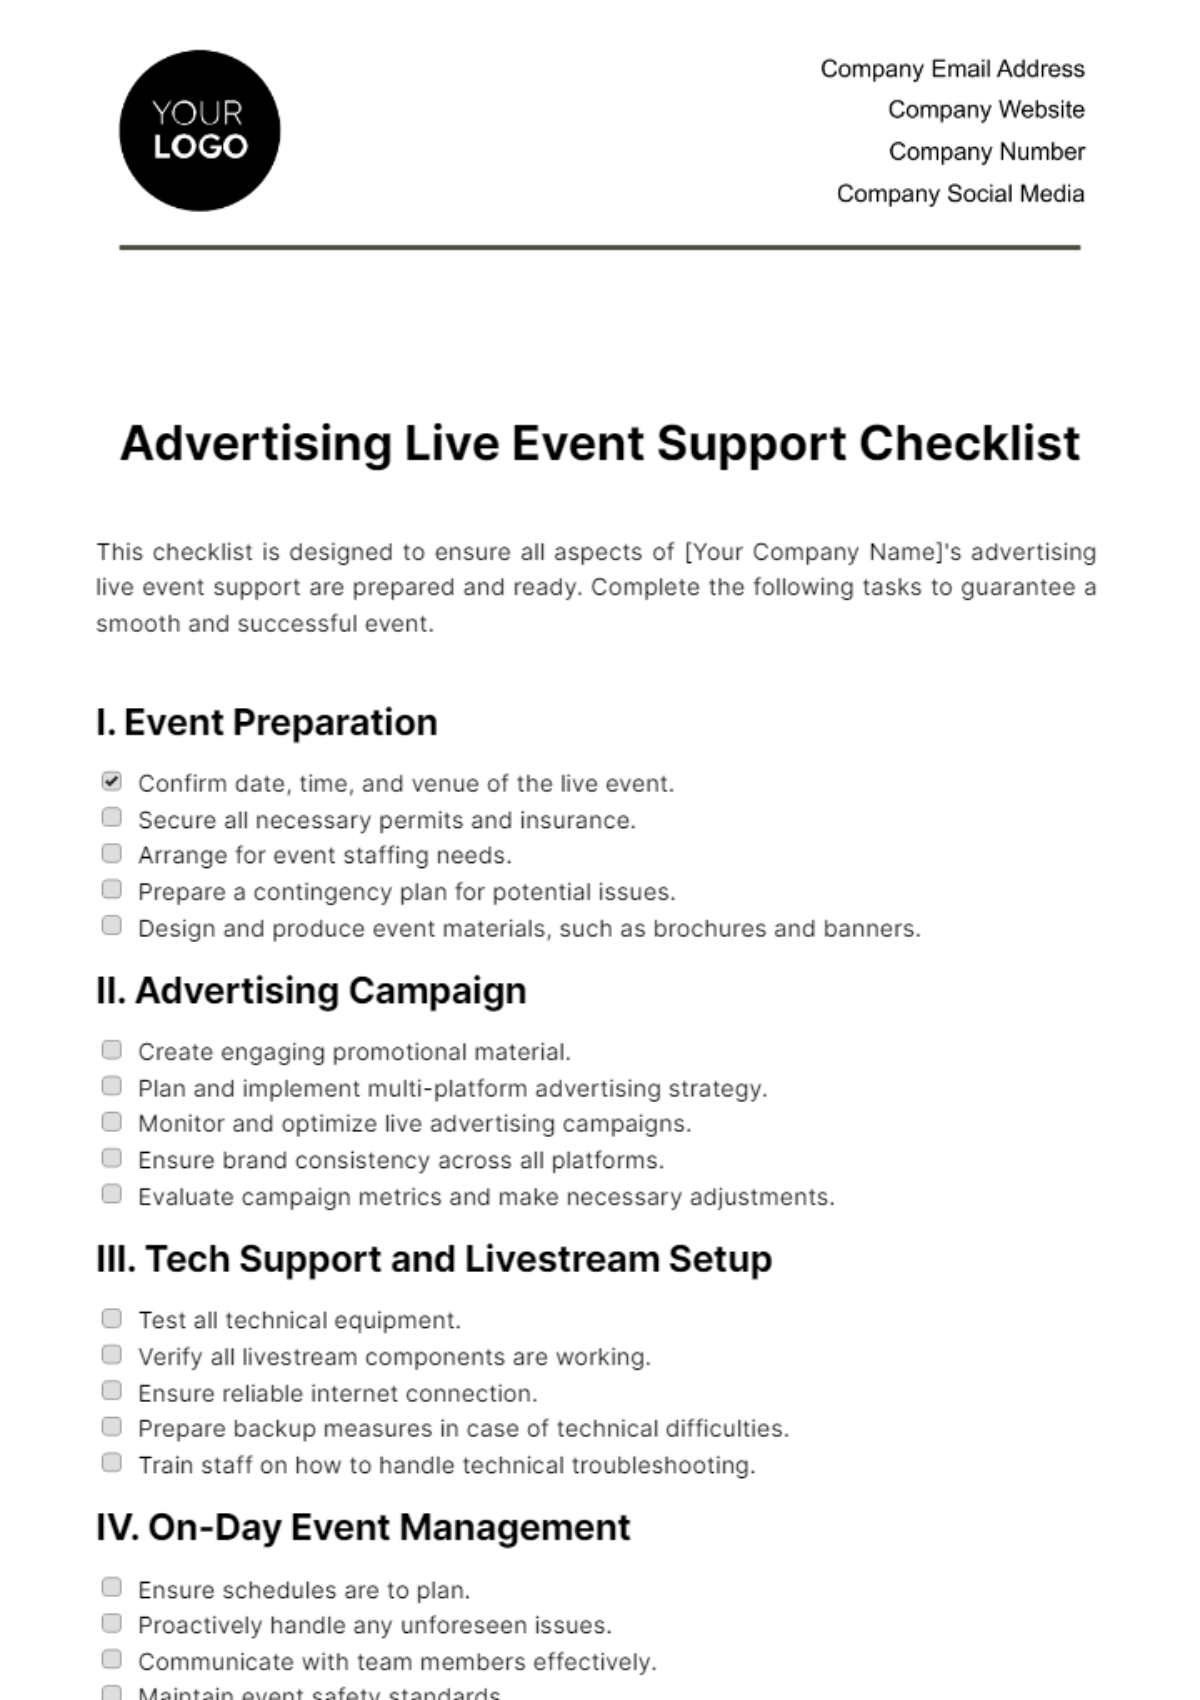 Free Advertising Live Event Support Checklist Template